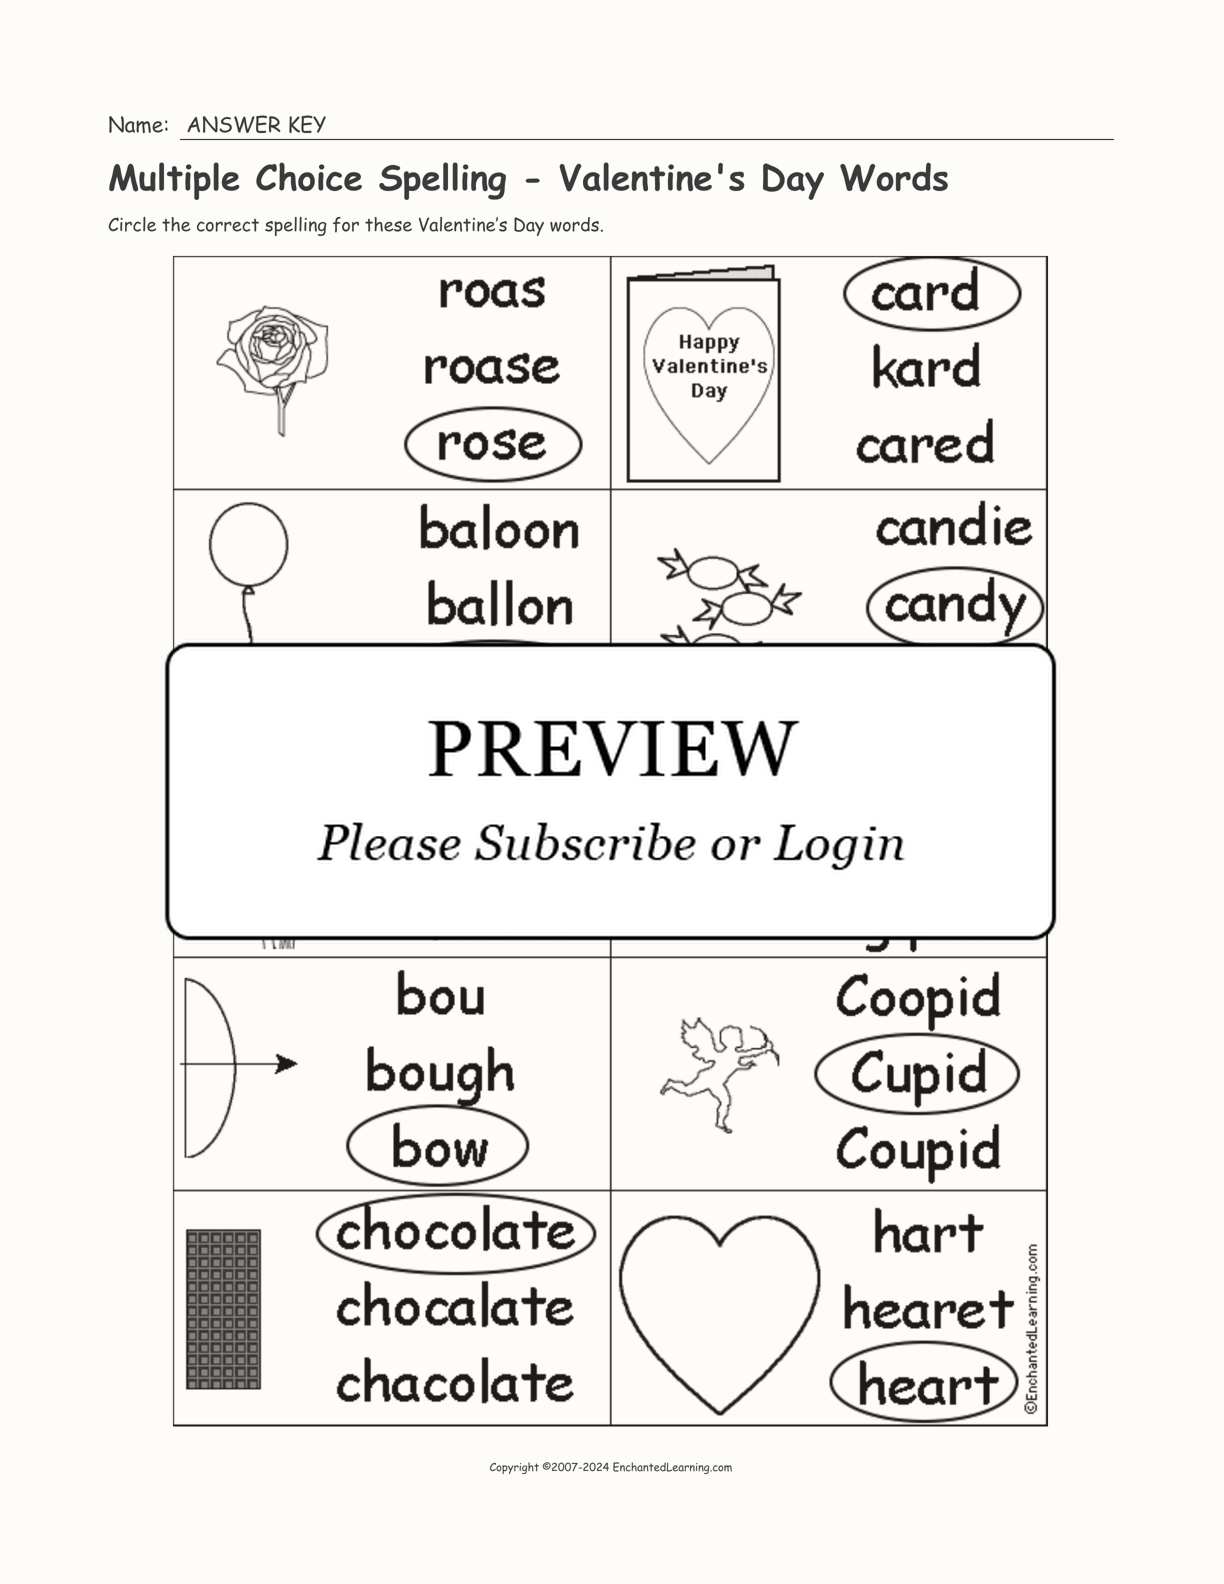 Multiple Choice Spelling - Valentine's Day Words interactive worksheet page 2